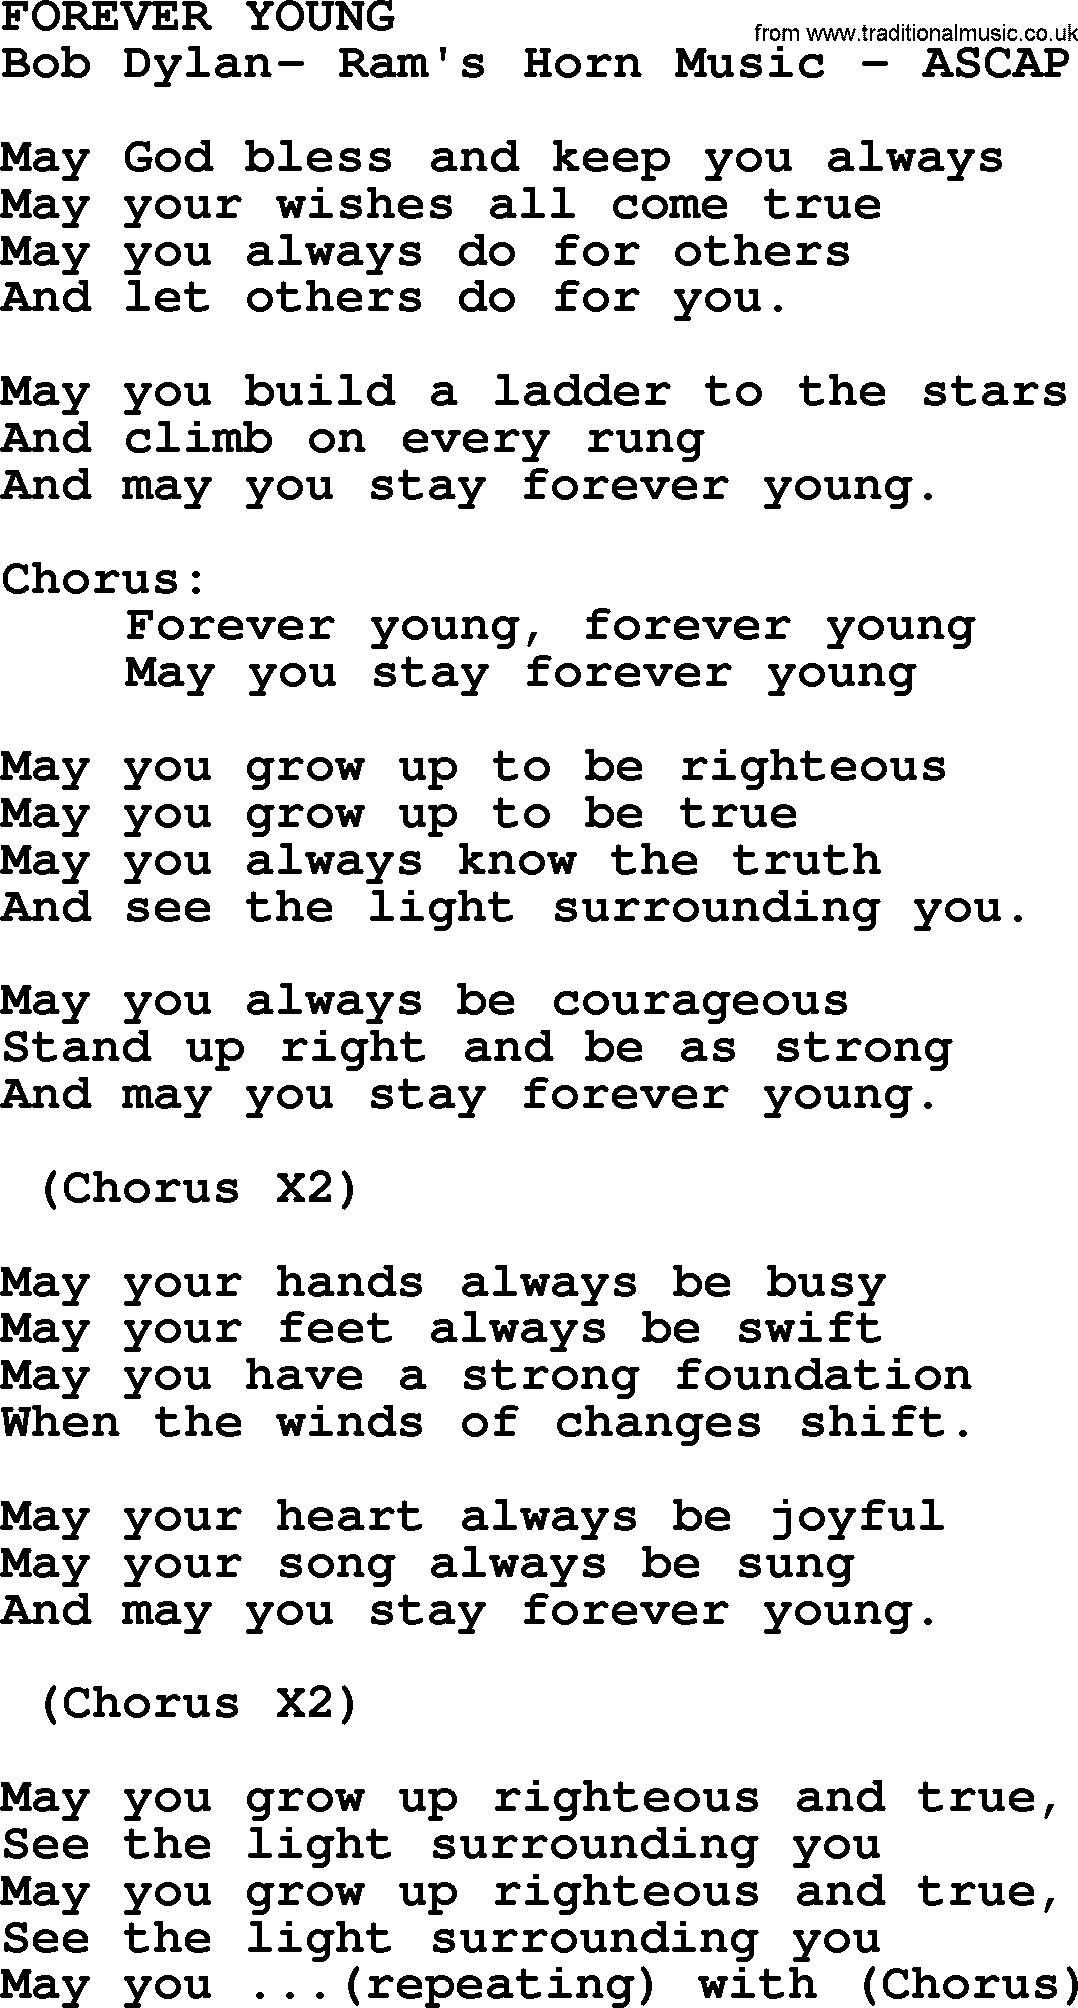 Peter, Paul and Mary song Forever Young lyrics